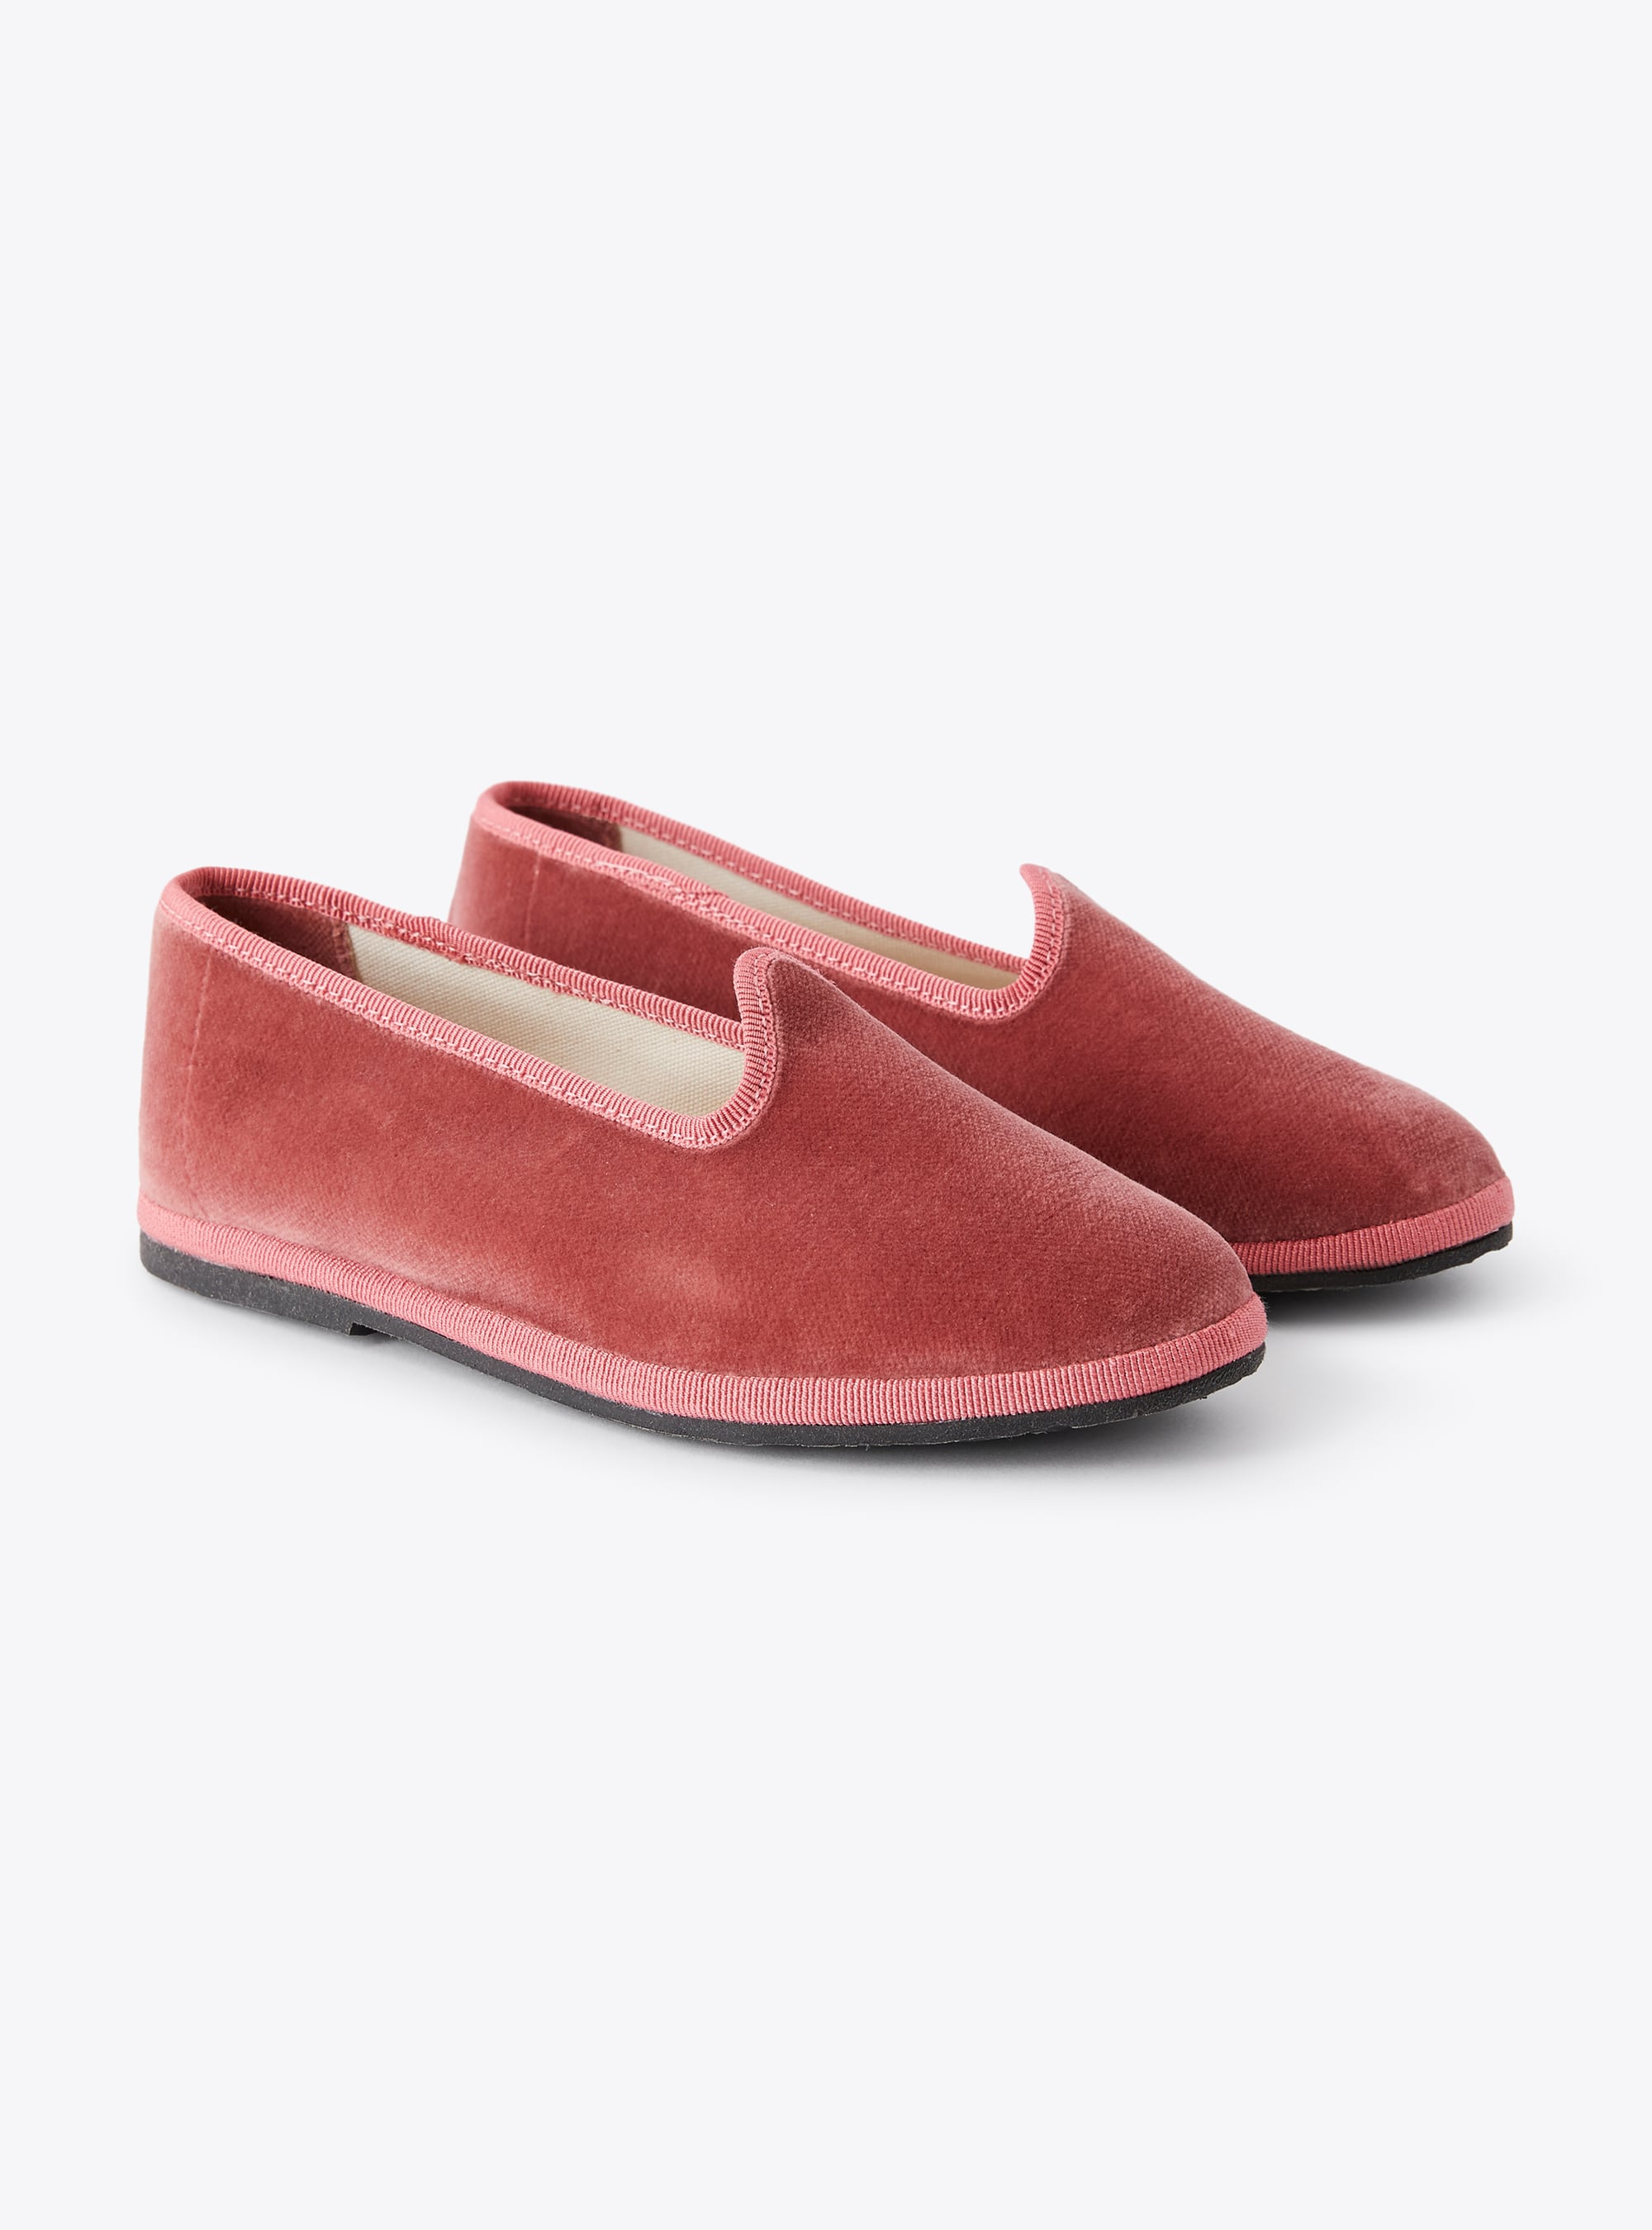 Slippers en velours rose - Chaussures - Il Gufo